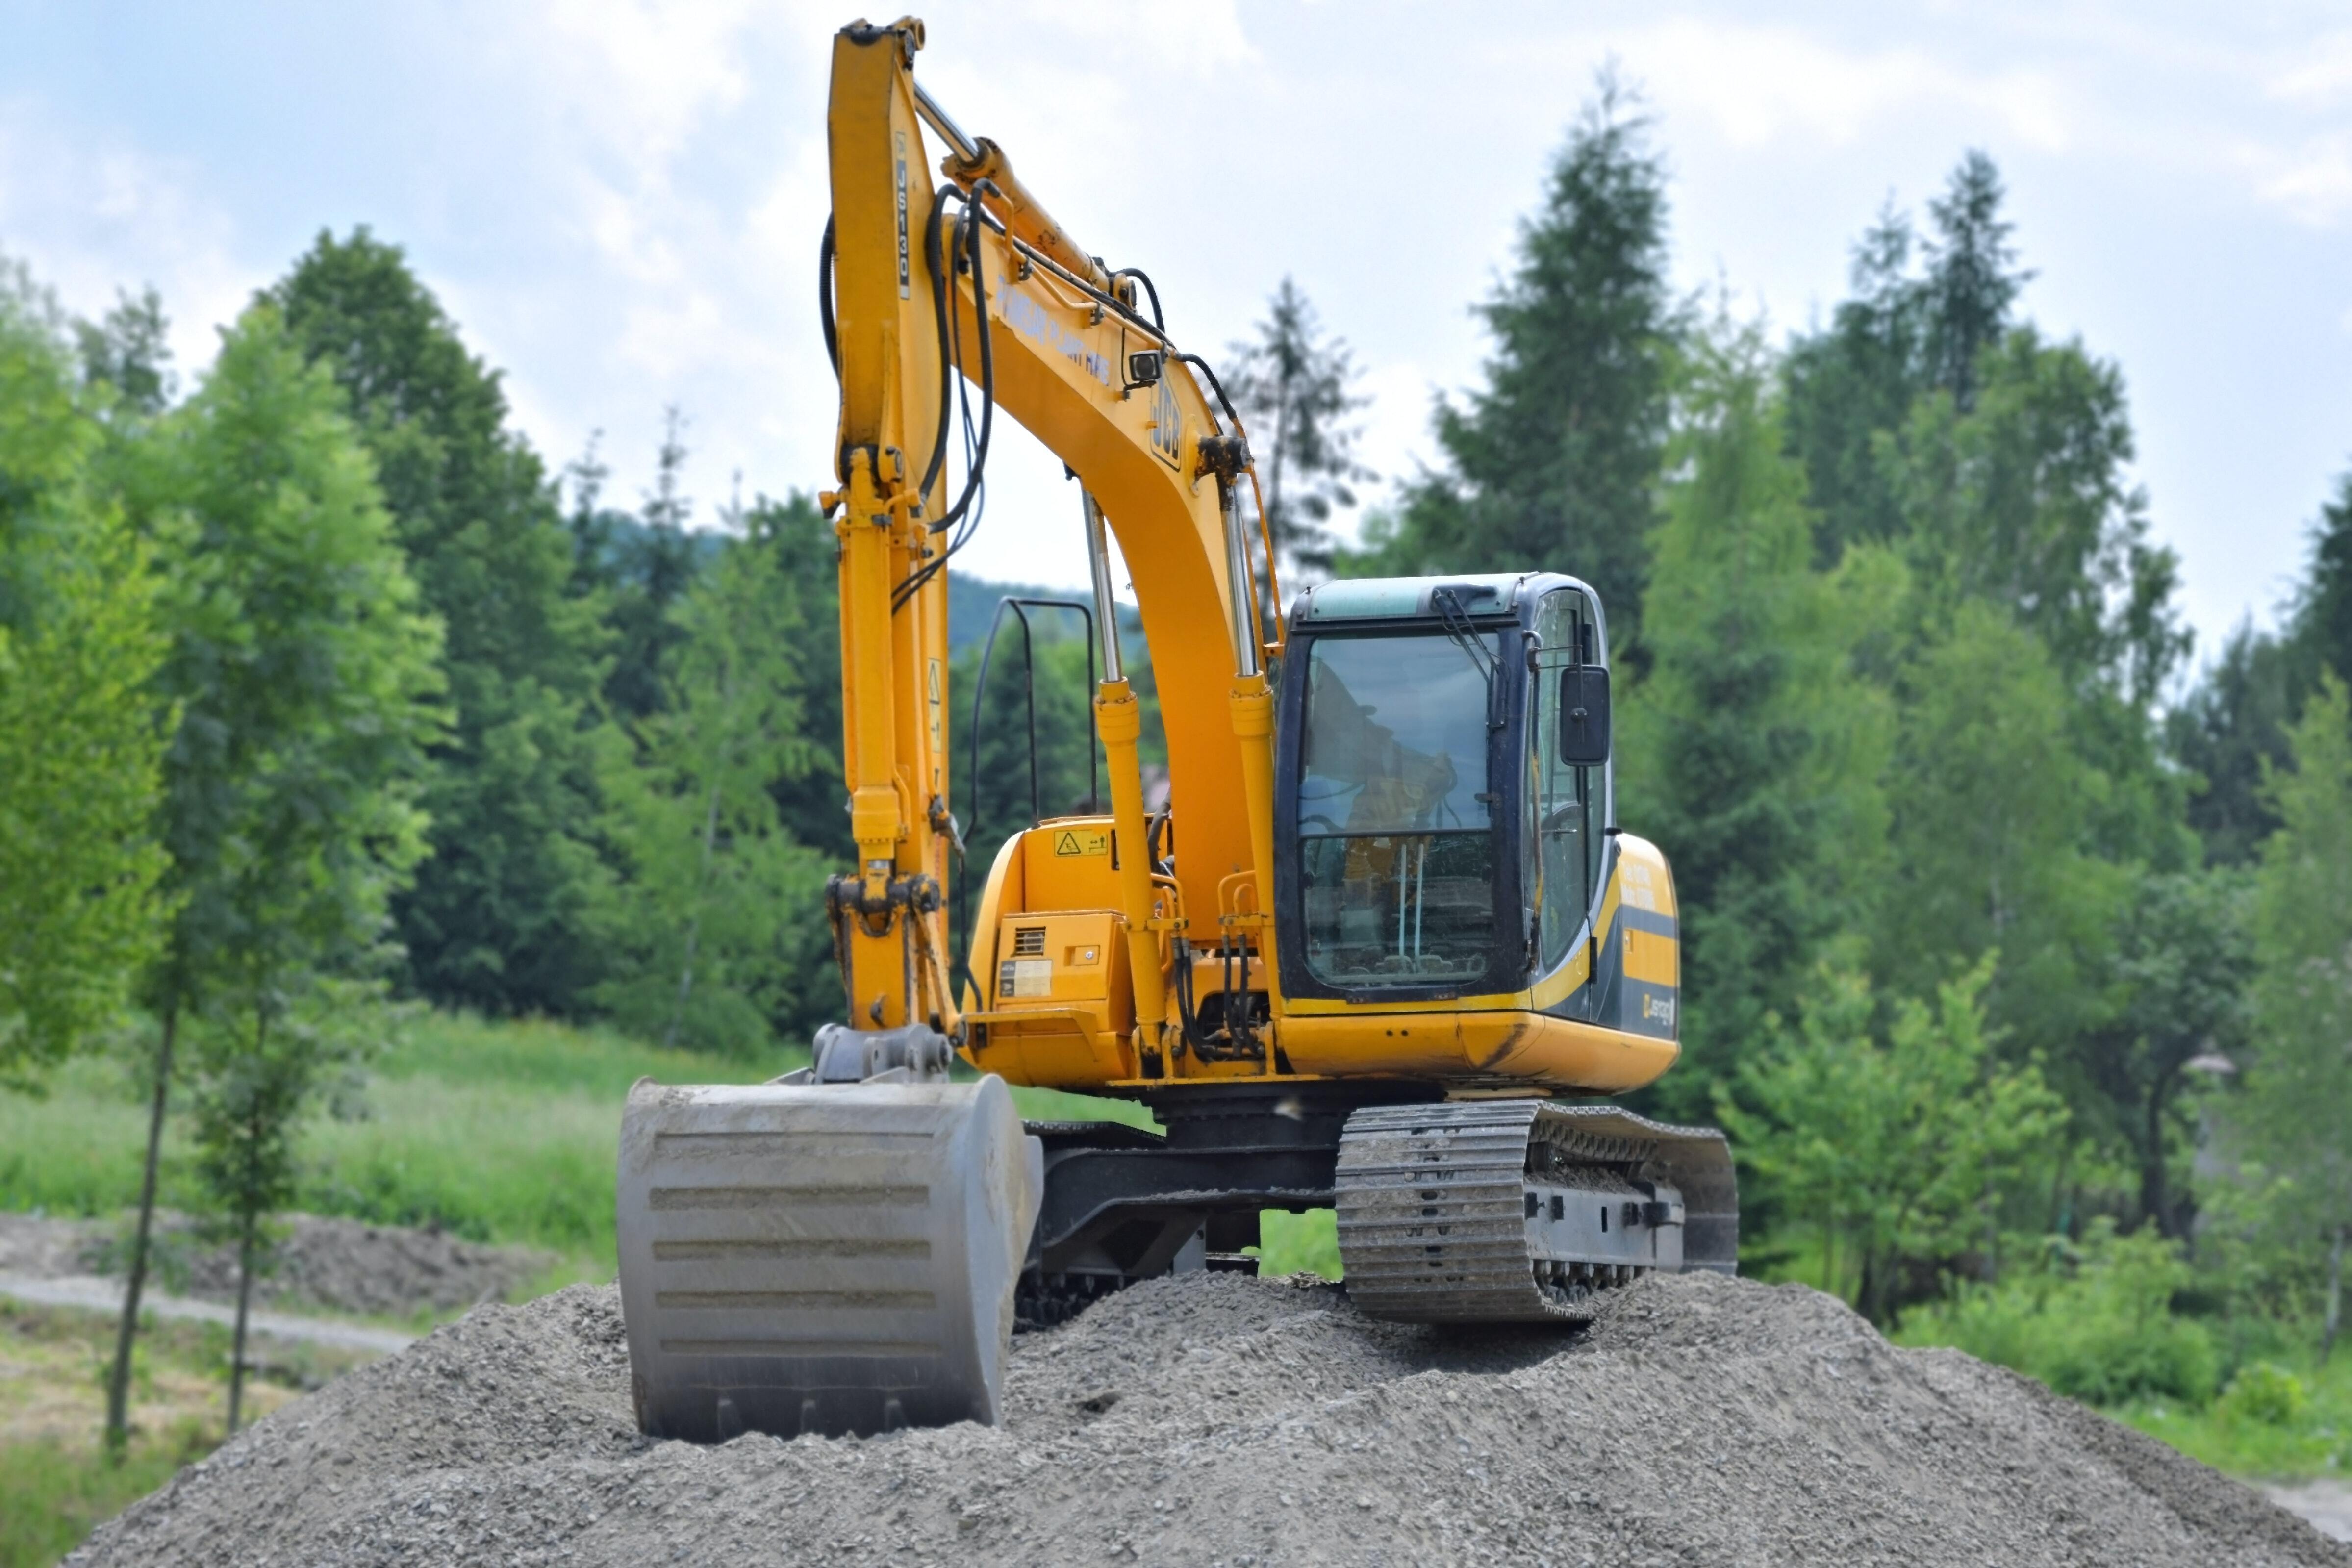 Real Time Telematics Data for Rental Construction Equipment